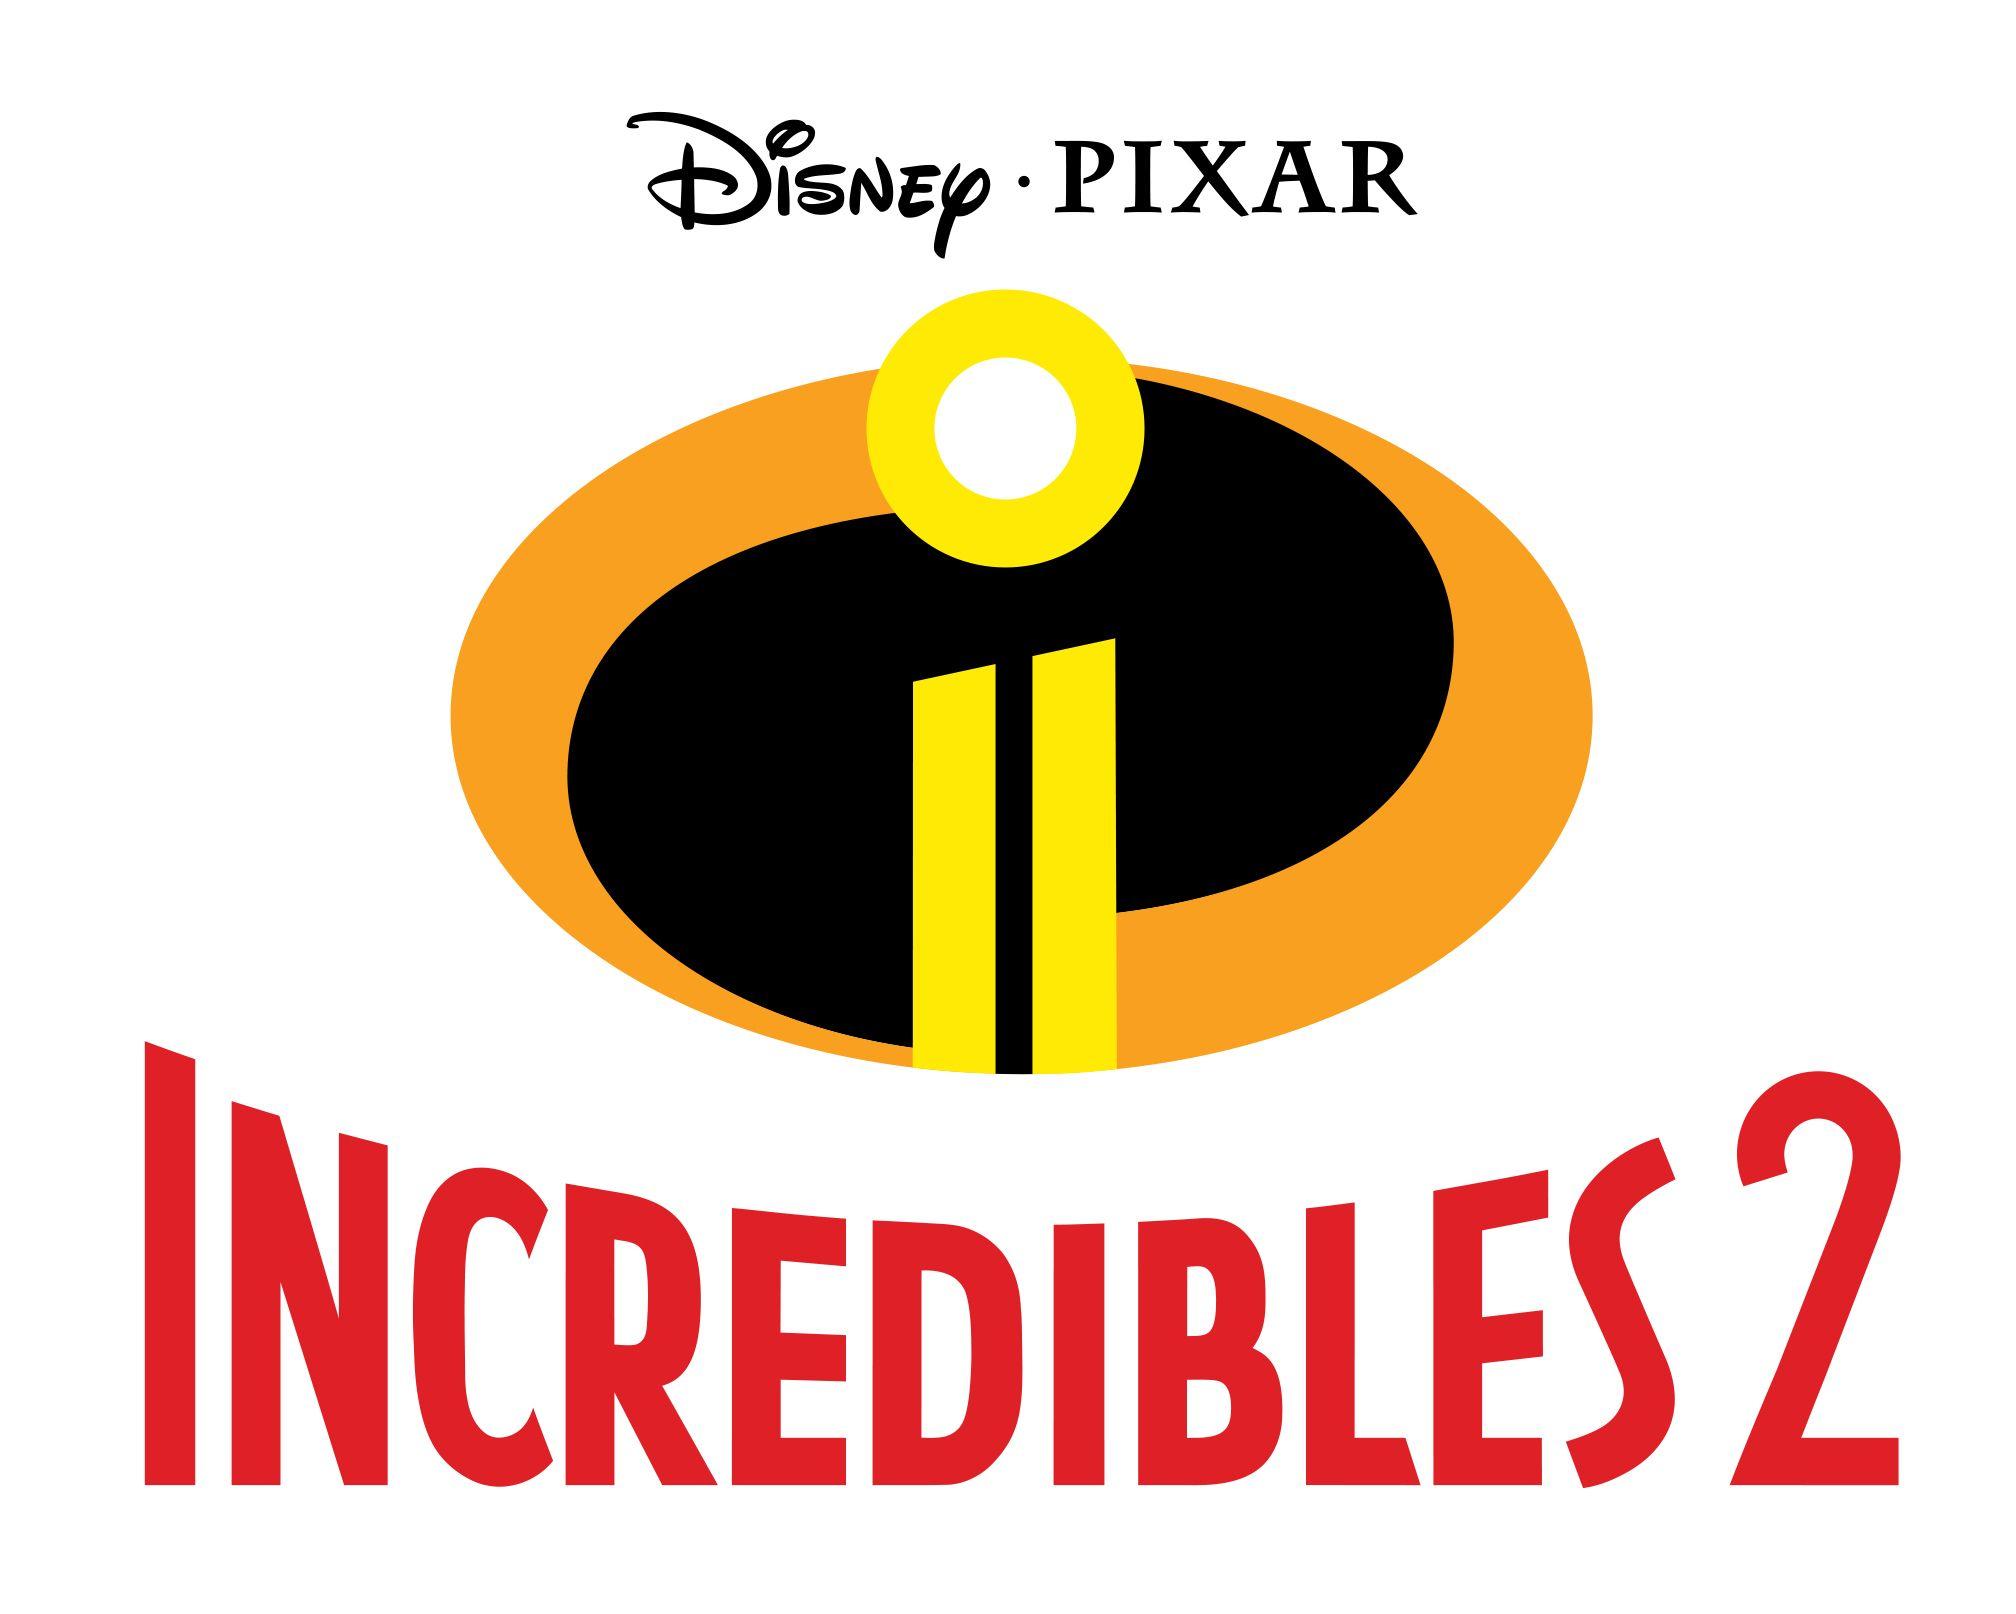 Disney Pixar The Incredibles Logo - The Incredibles 2, Toy Story 4 and ... Planes? What we learned from ...